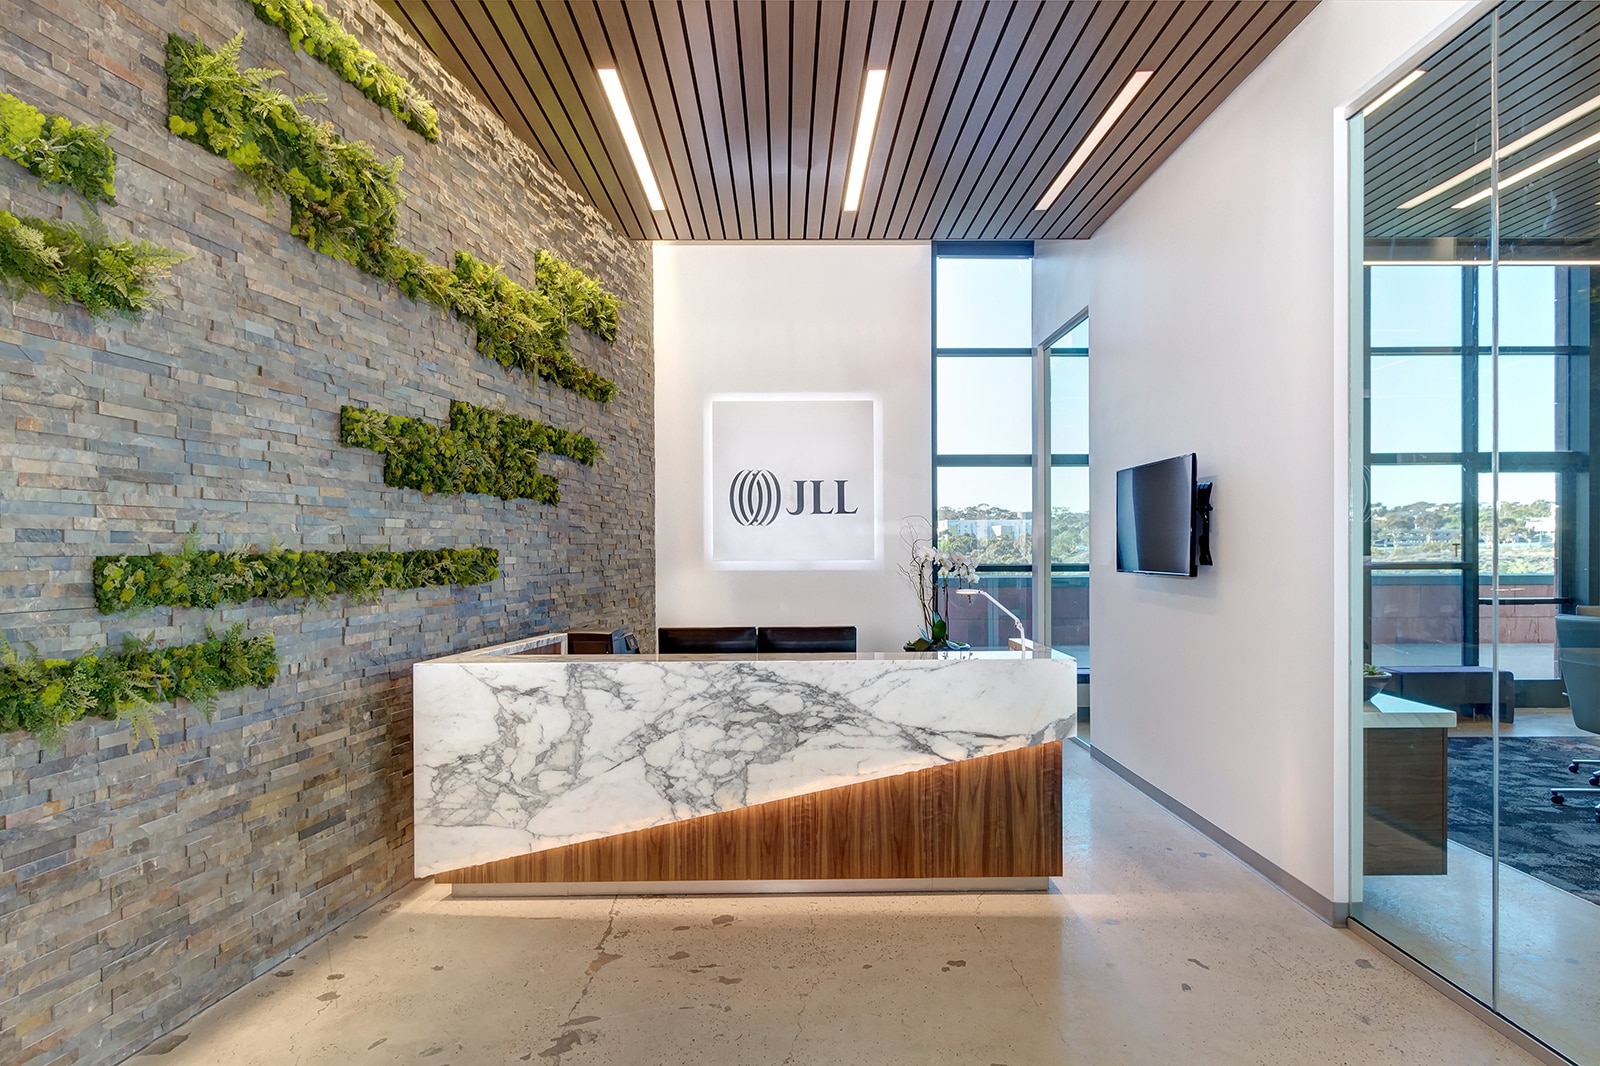 JLL San Diego, Reception Design by ID Studios, Photo by Jared Nelson